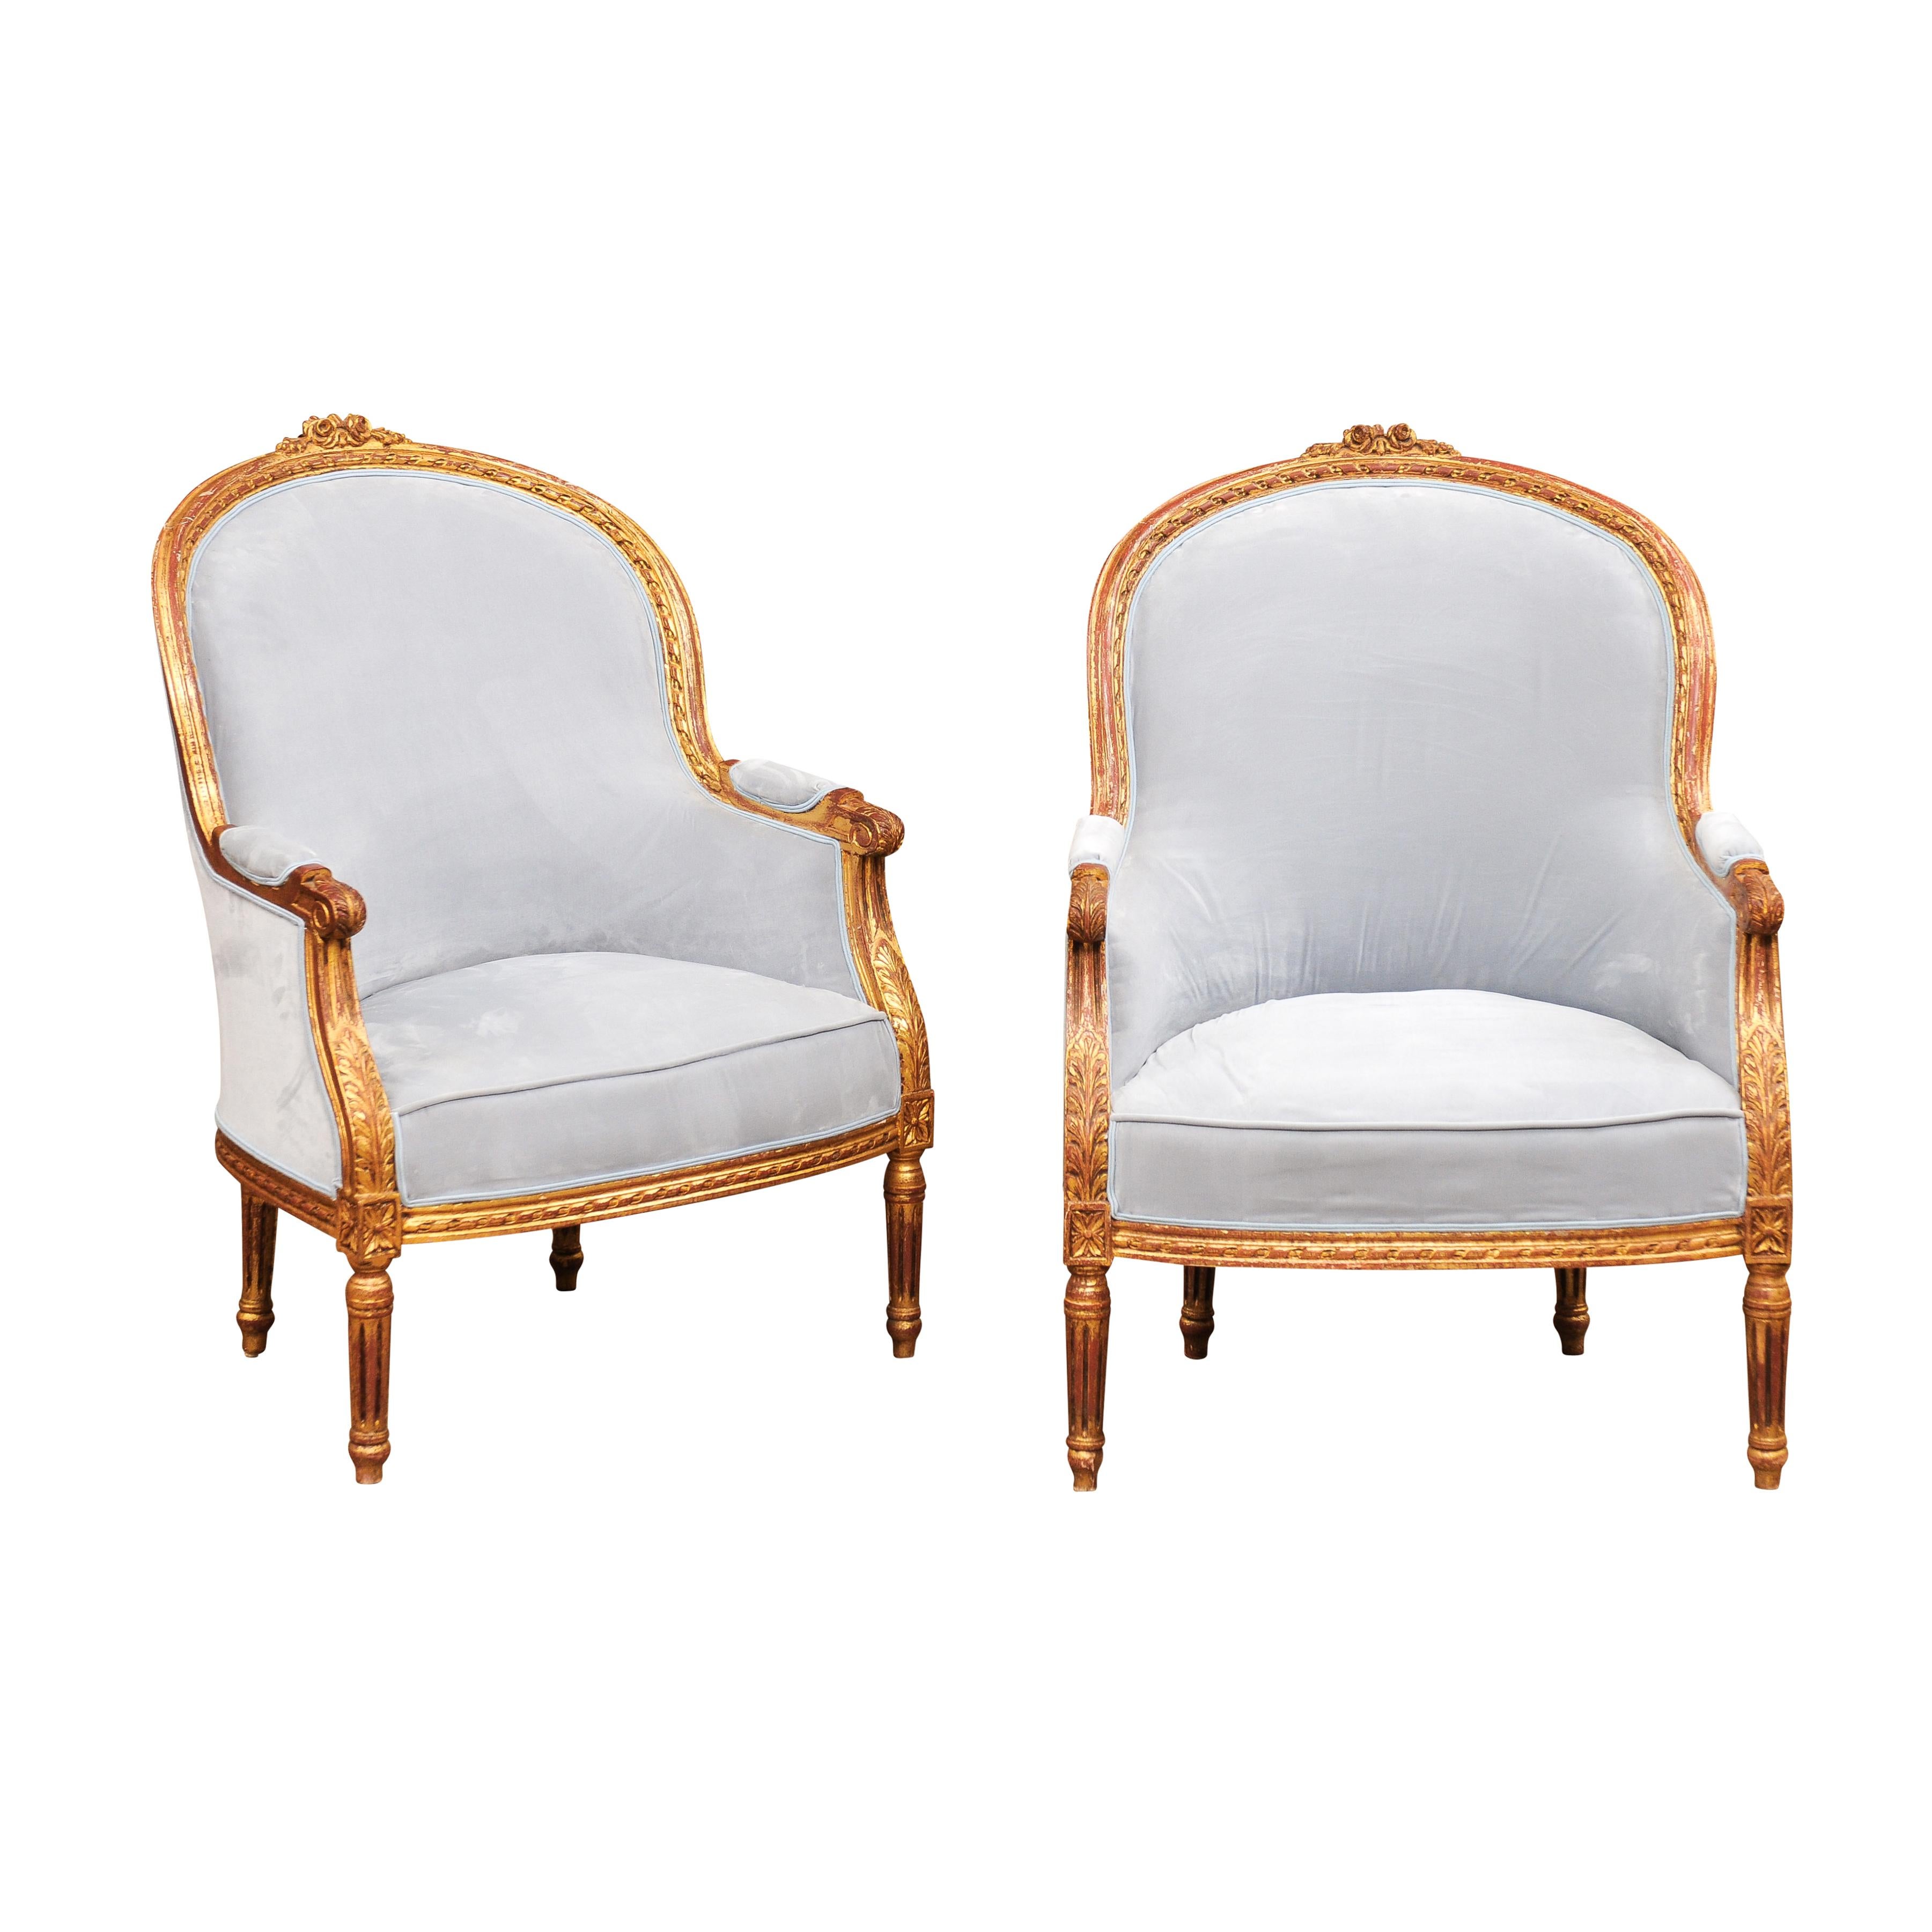 A pair of French Louis XVI style bergères chairs from the 20th century, upholstered with sky blue velvet Pierre Frey fabric with curving backs, floral carved crests, scrolling knuckles, carved acanthus leaves and fluted legs. Indulge in the